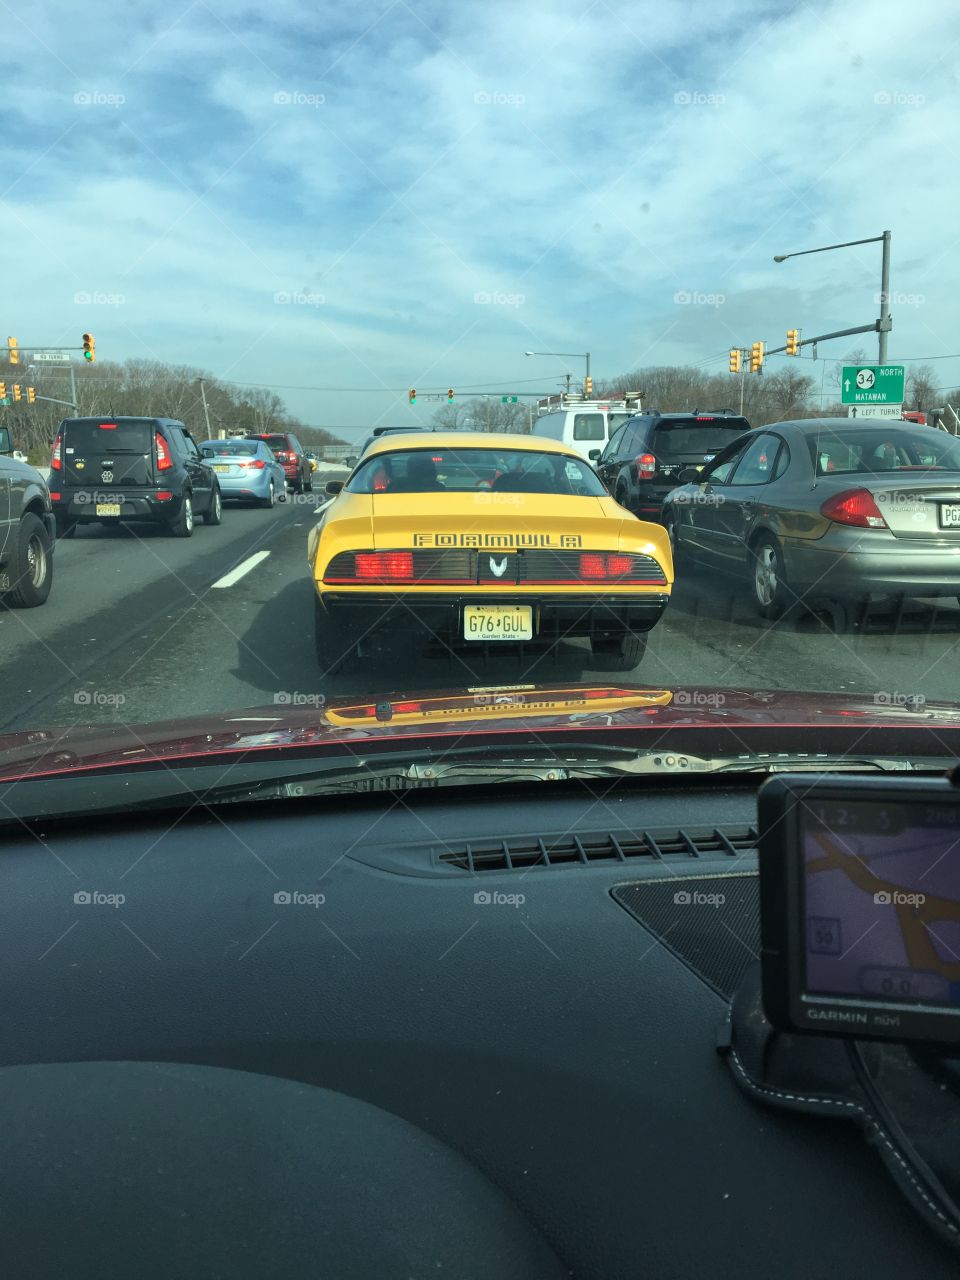 Cool car on a beautiful warm NJ day. A day before snow. 